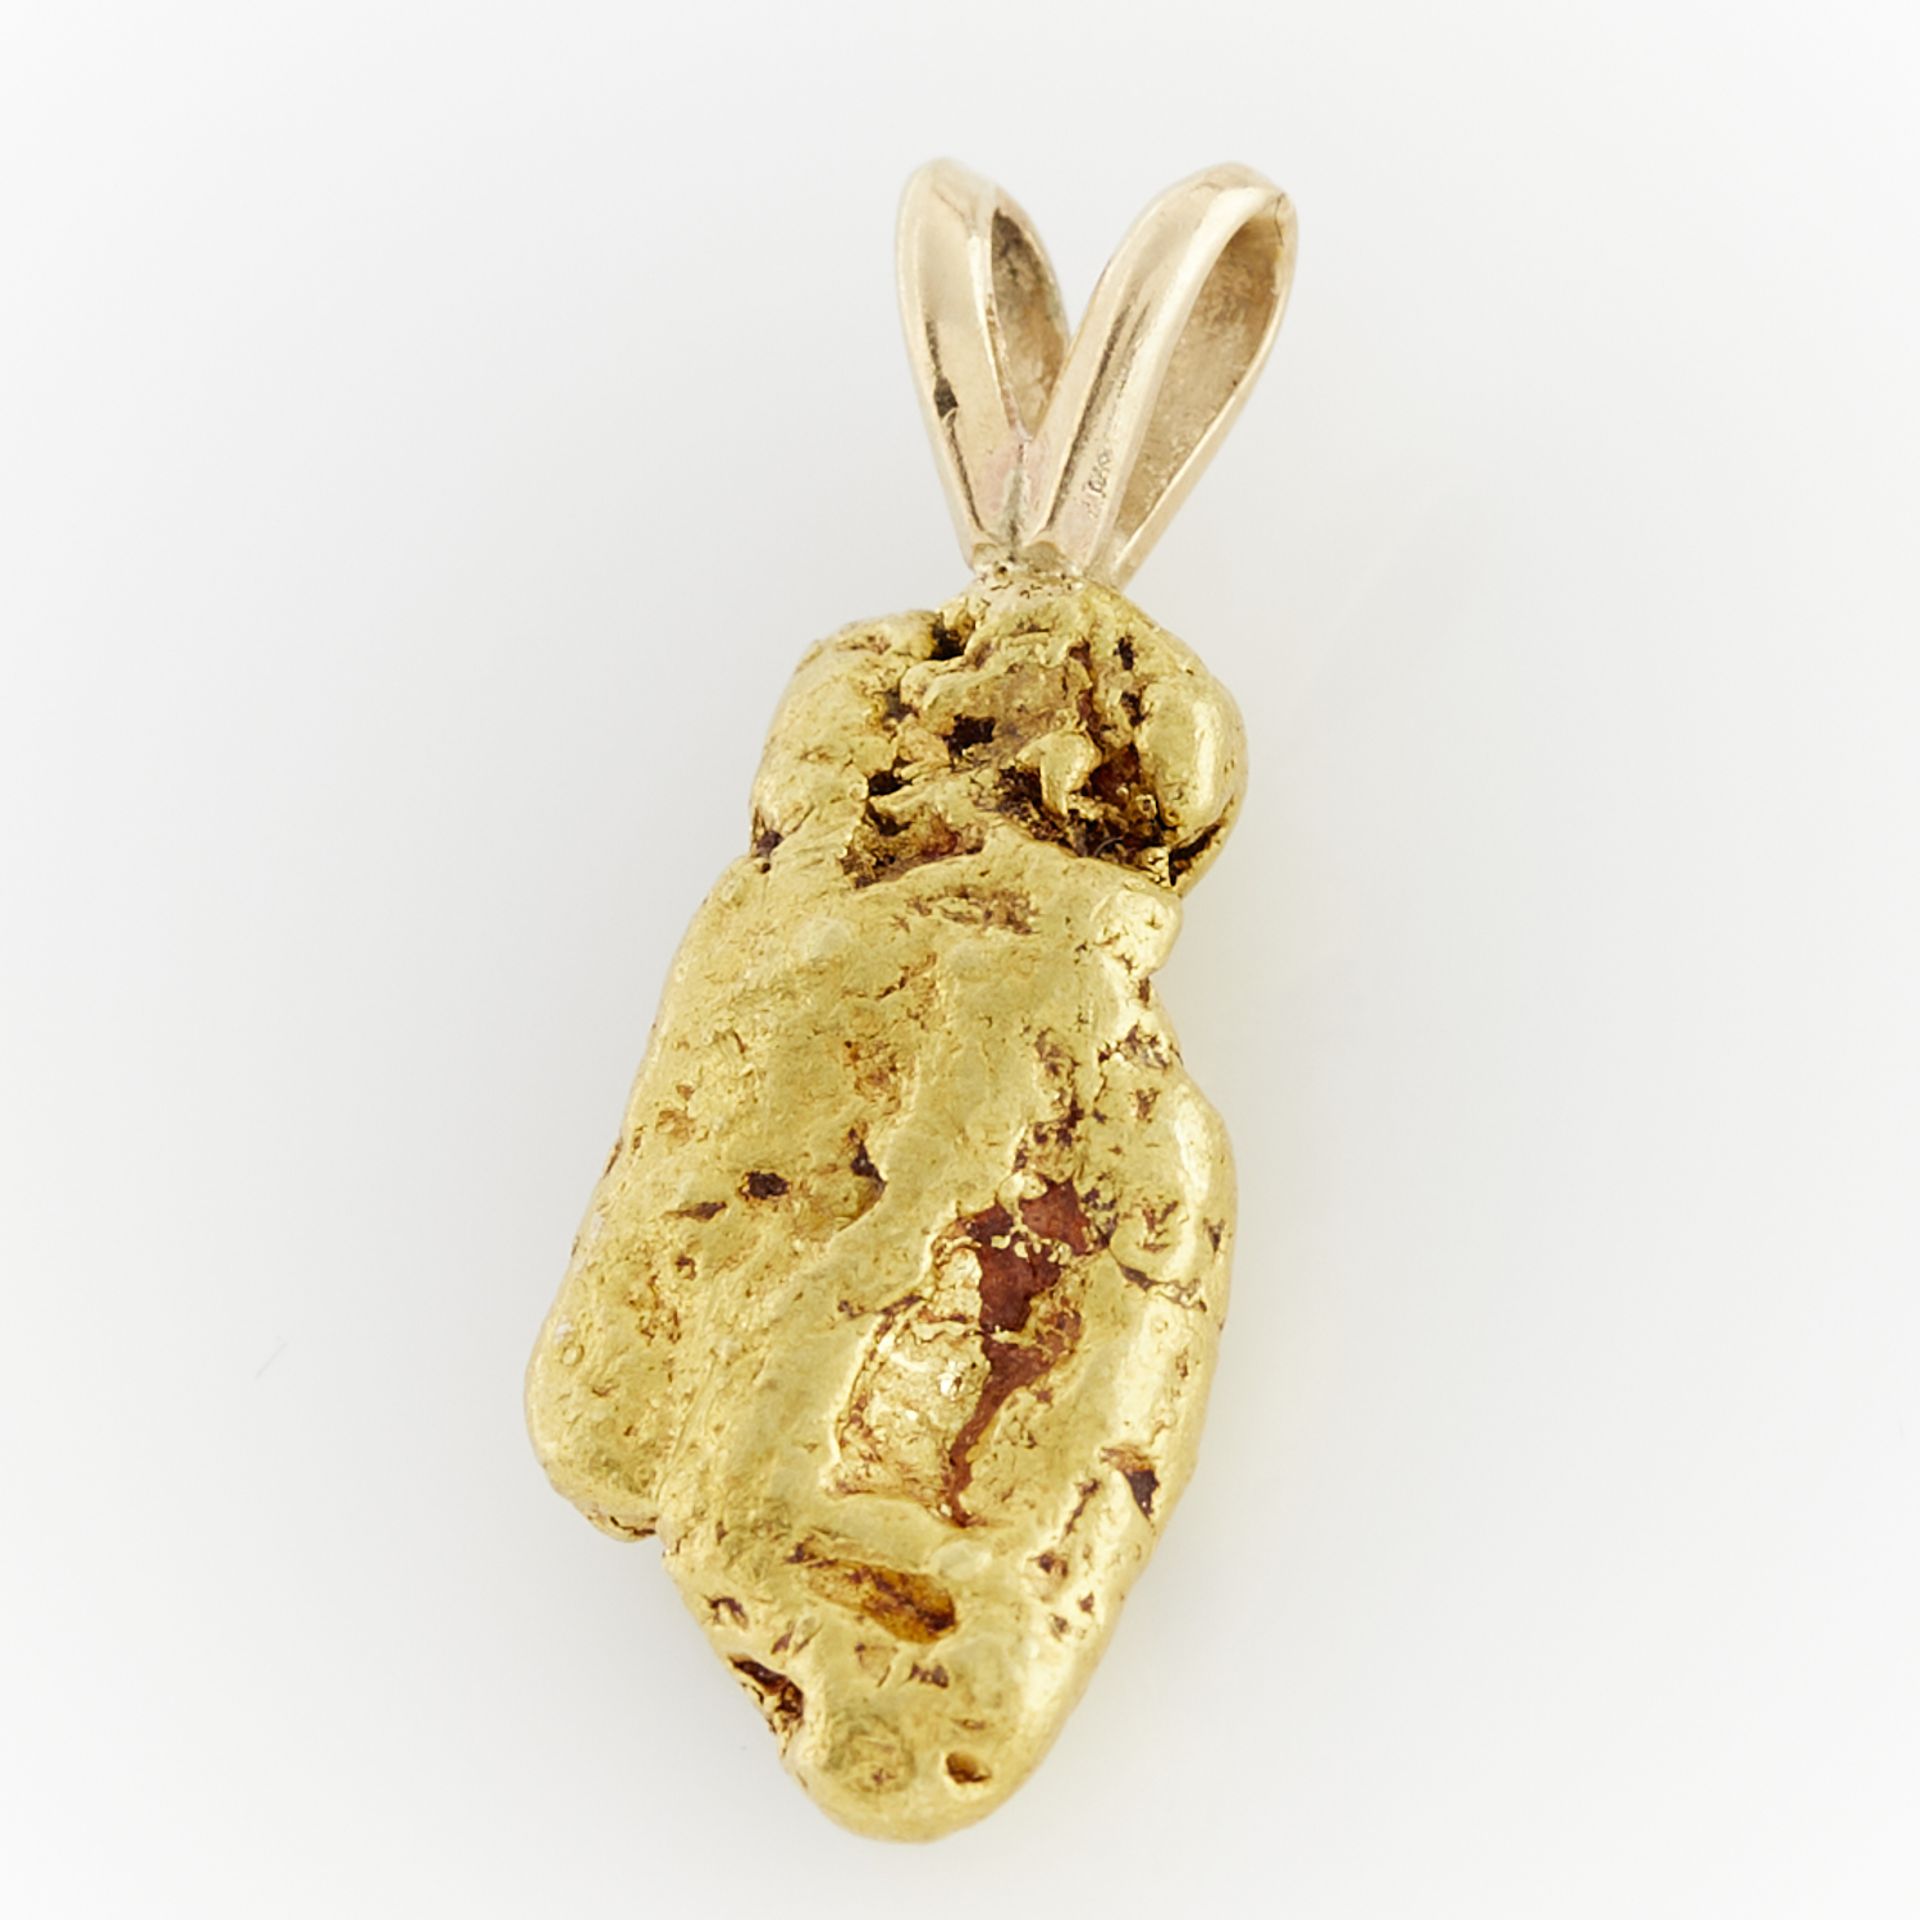 Gold Nugget Form Pendant - Image 4 of 5